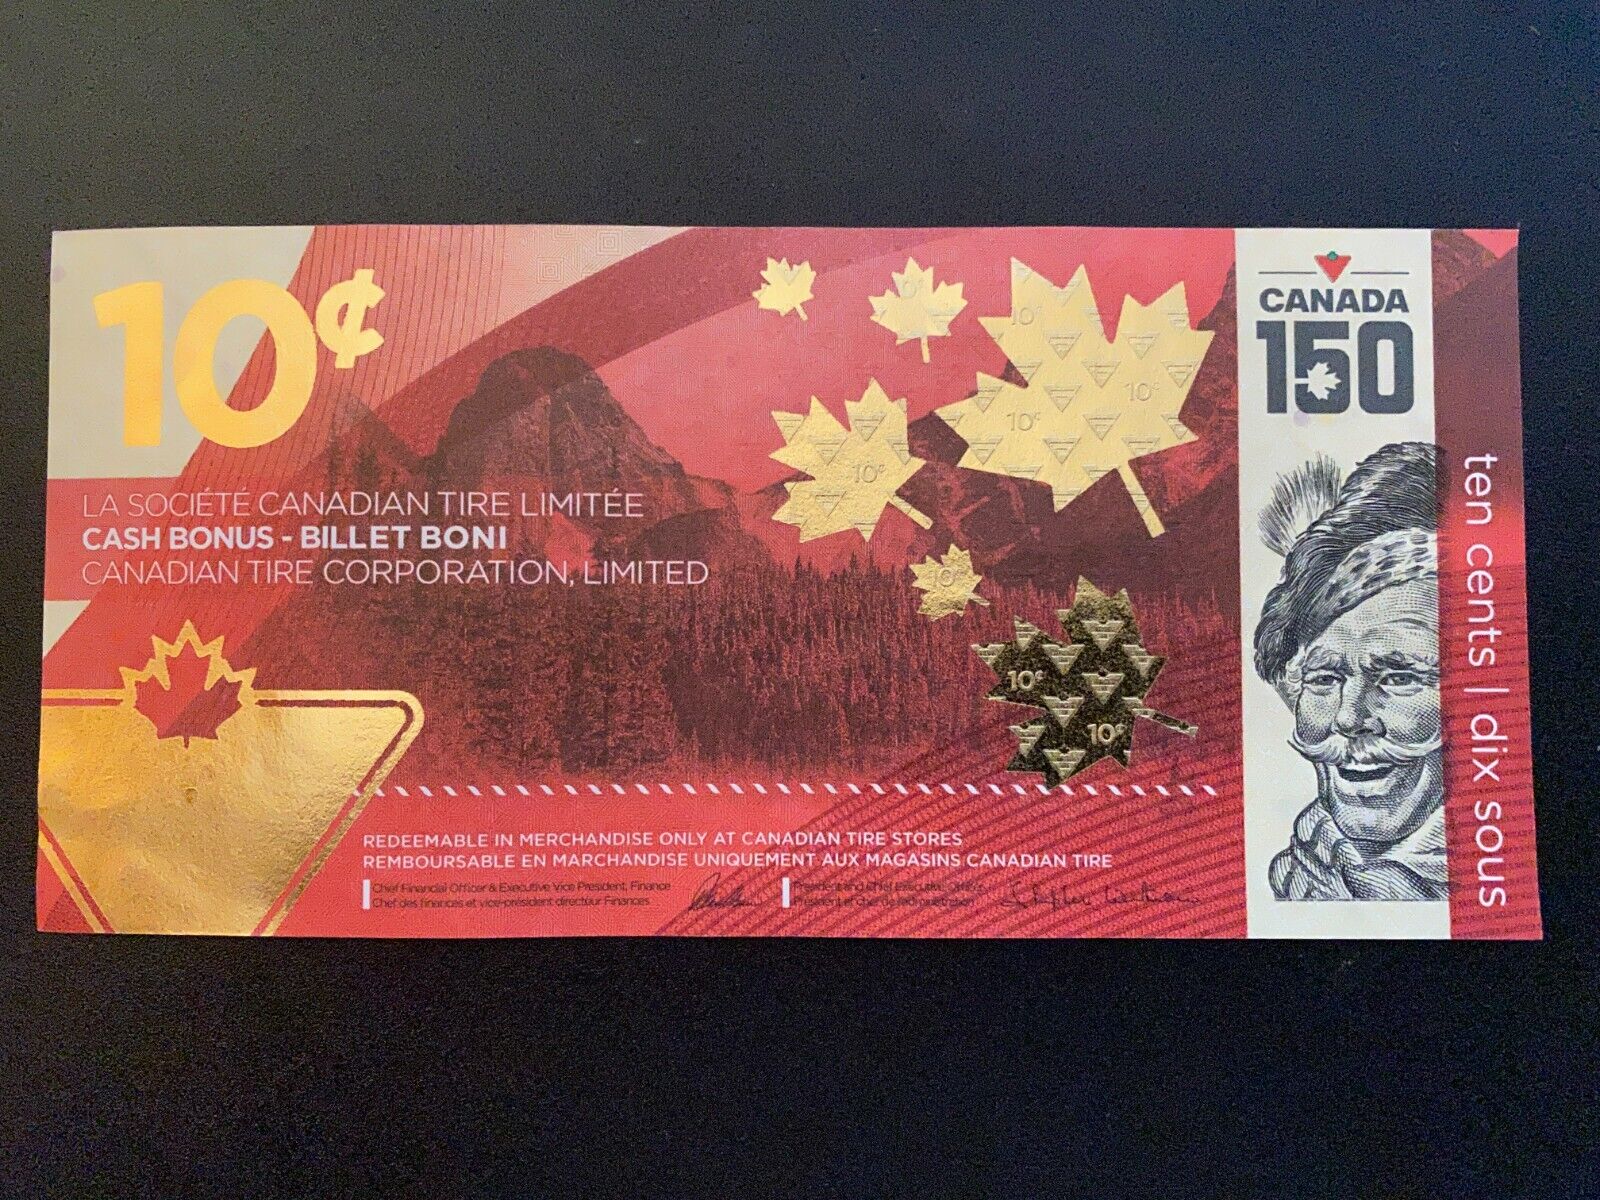 2017 Canada 150 Canadian Tire Ctc Ten Cents Uncirculated Banknote